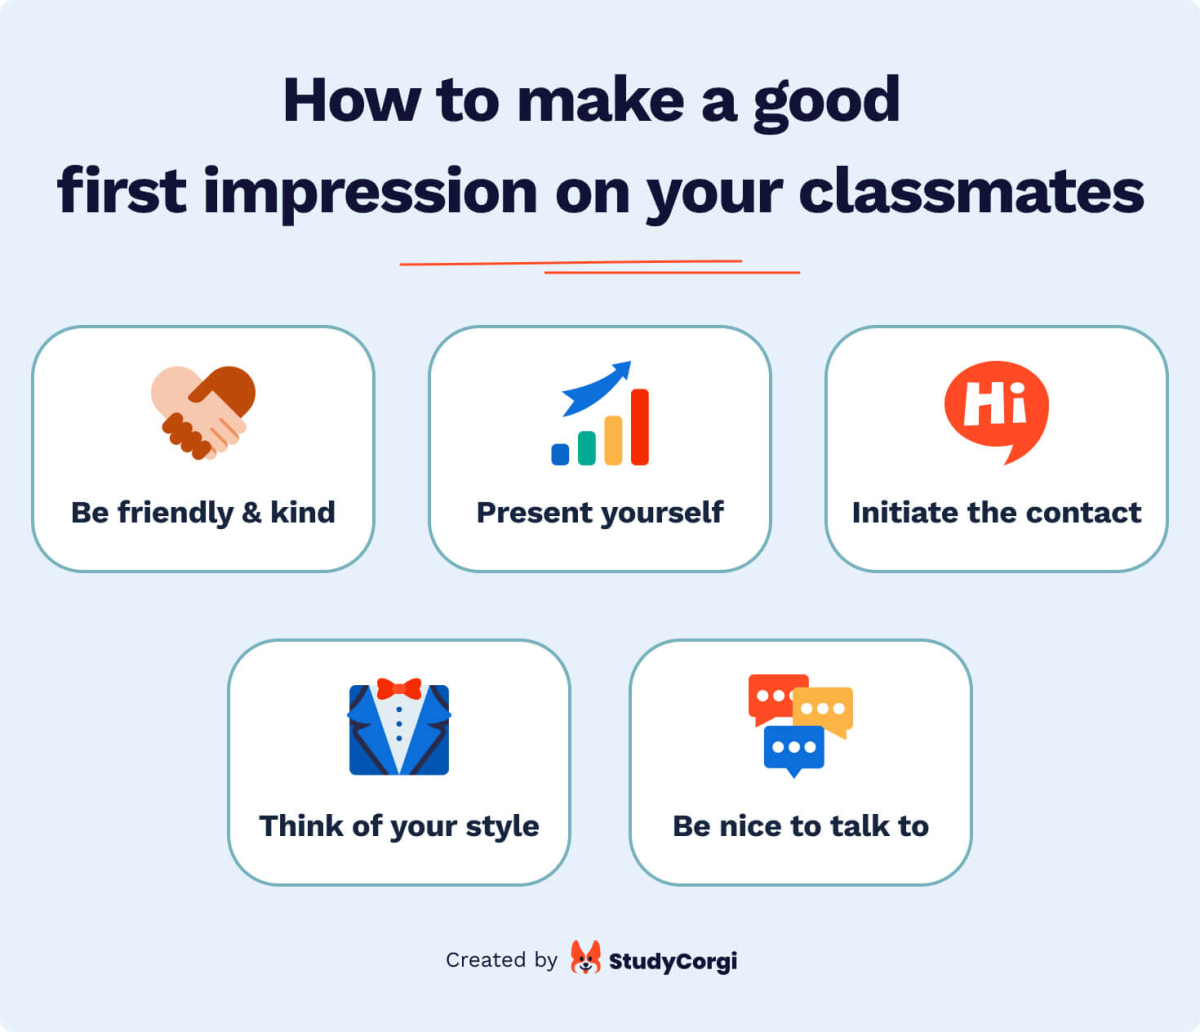 The picture explains how to make a good first impression on your classmates.